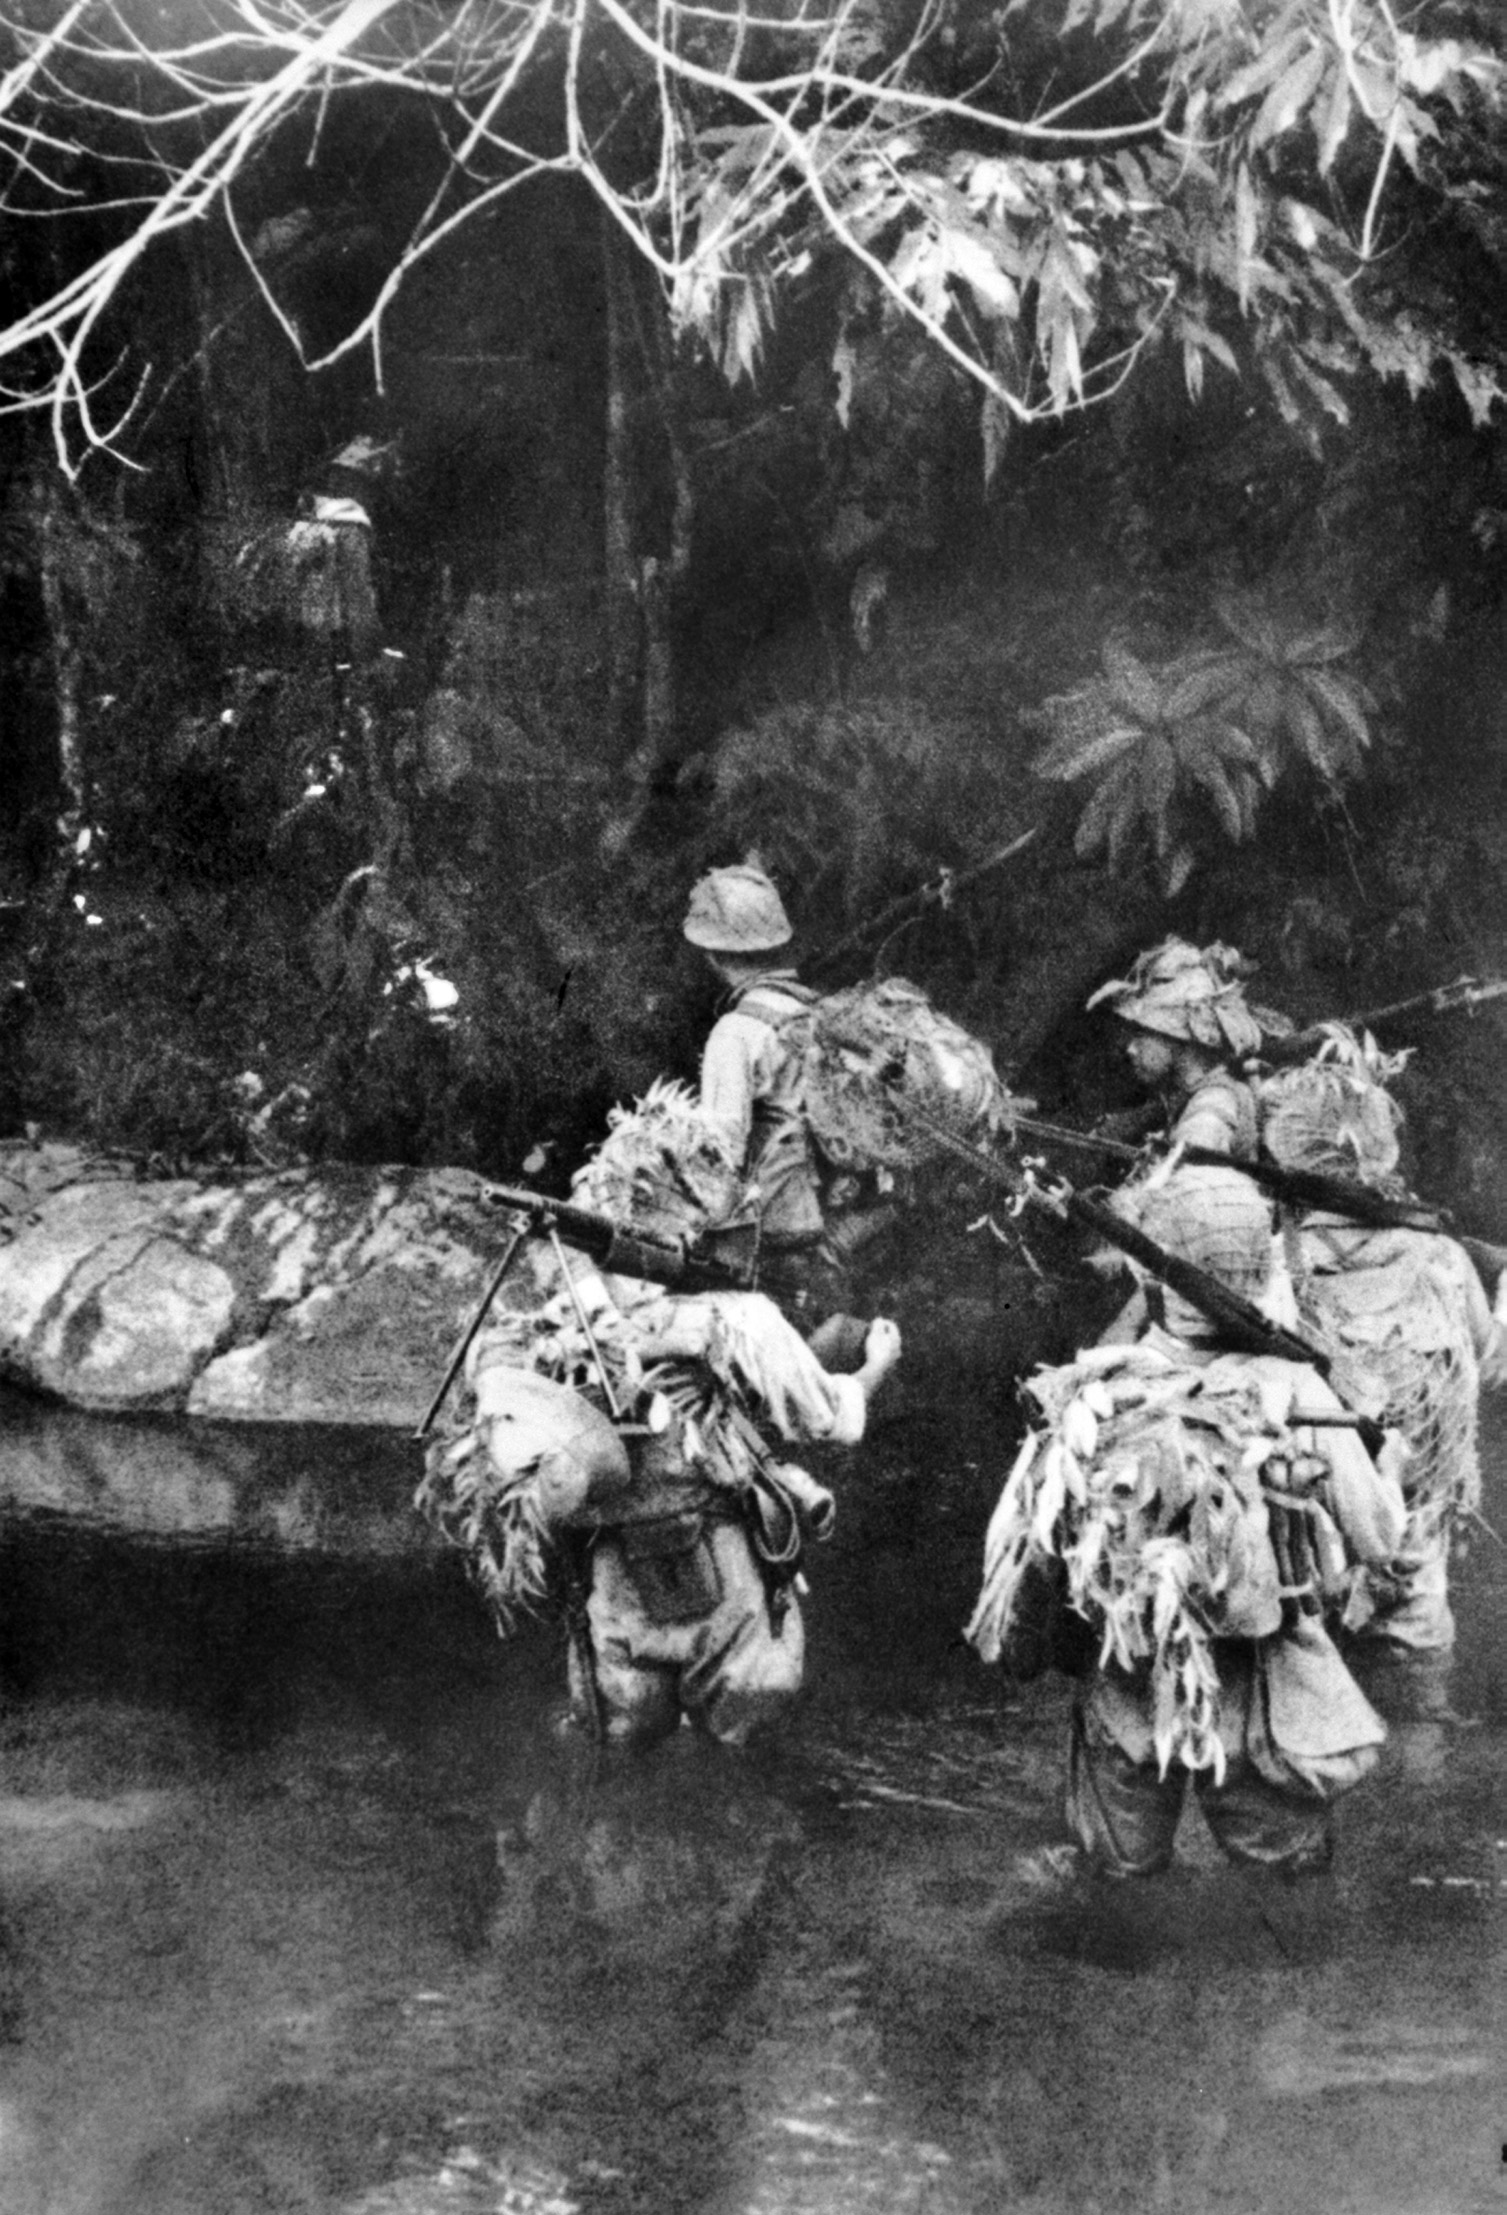 Japanese soldiers, their helmets festooned with camouflage, cross a stream during their offensive. The inhospitable terrain of the Malay Peninsula did little to slow the advance of the invading Japanese, who were well trained and disciplined.